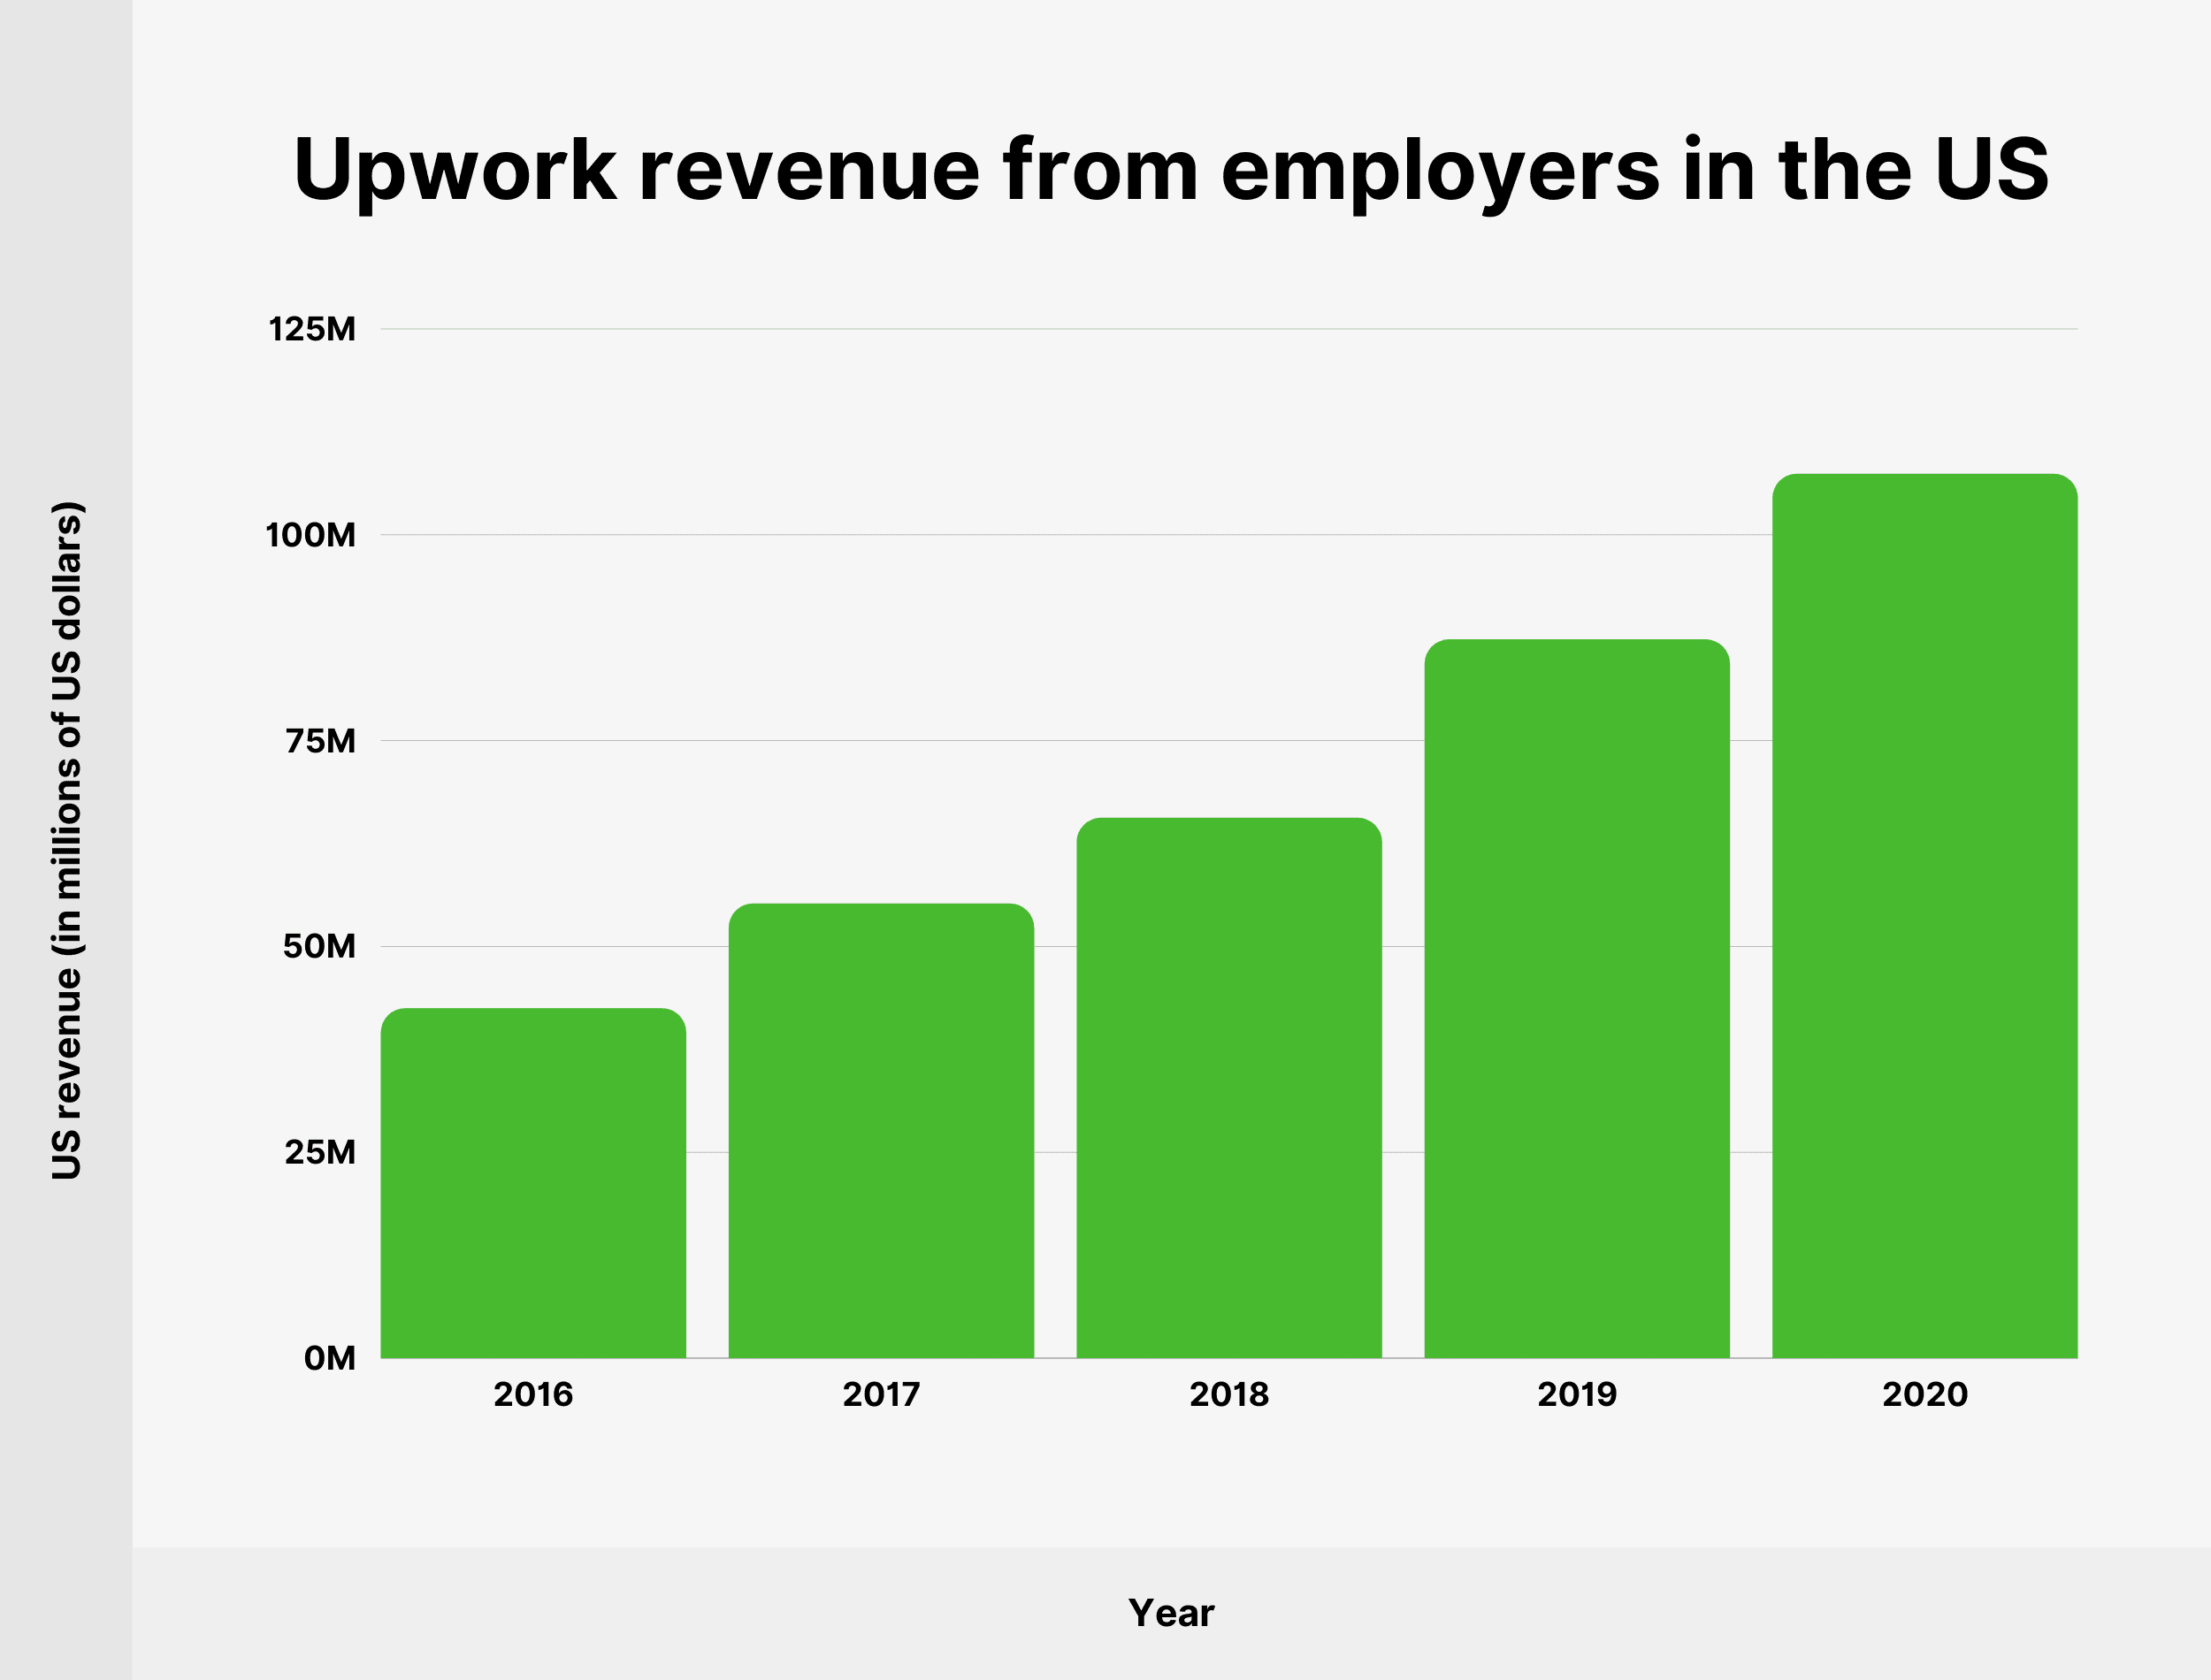 Upwork revenue from employers in the US